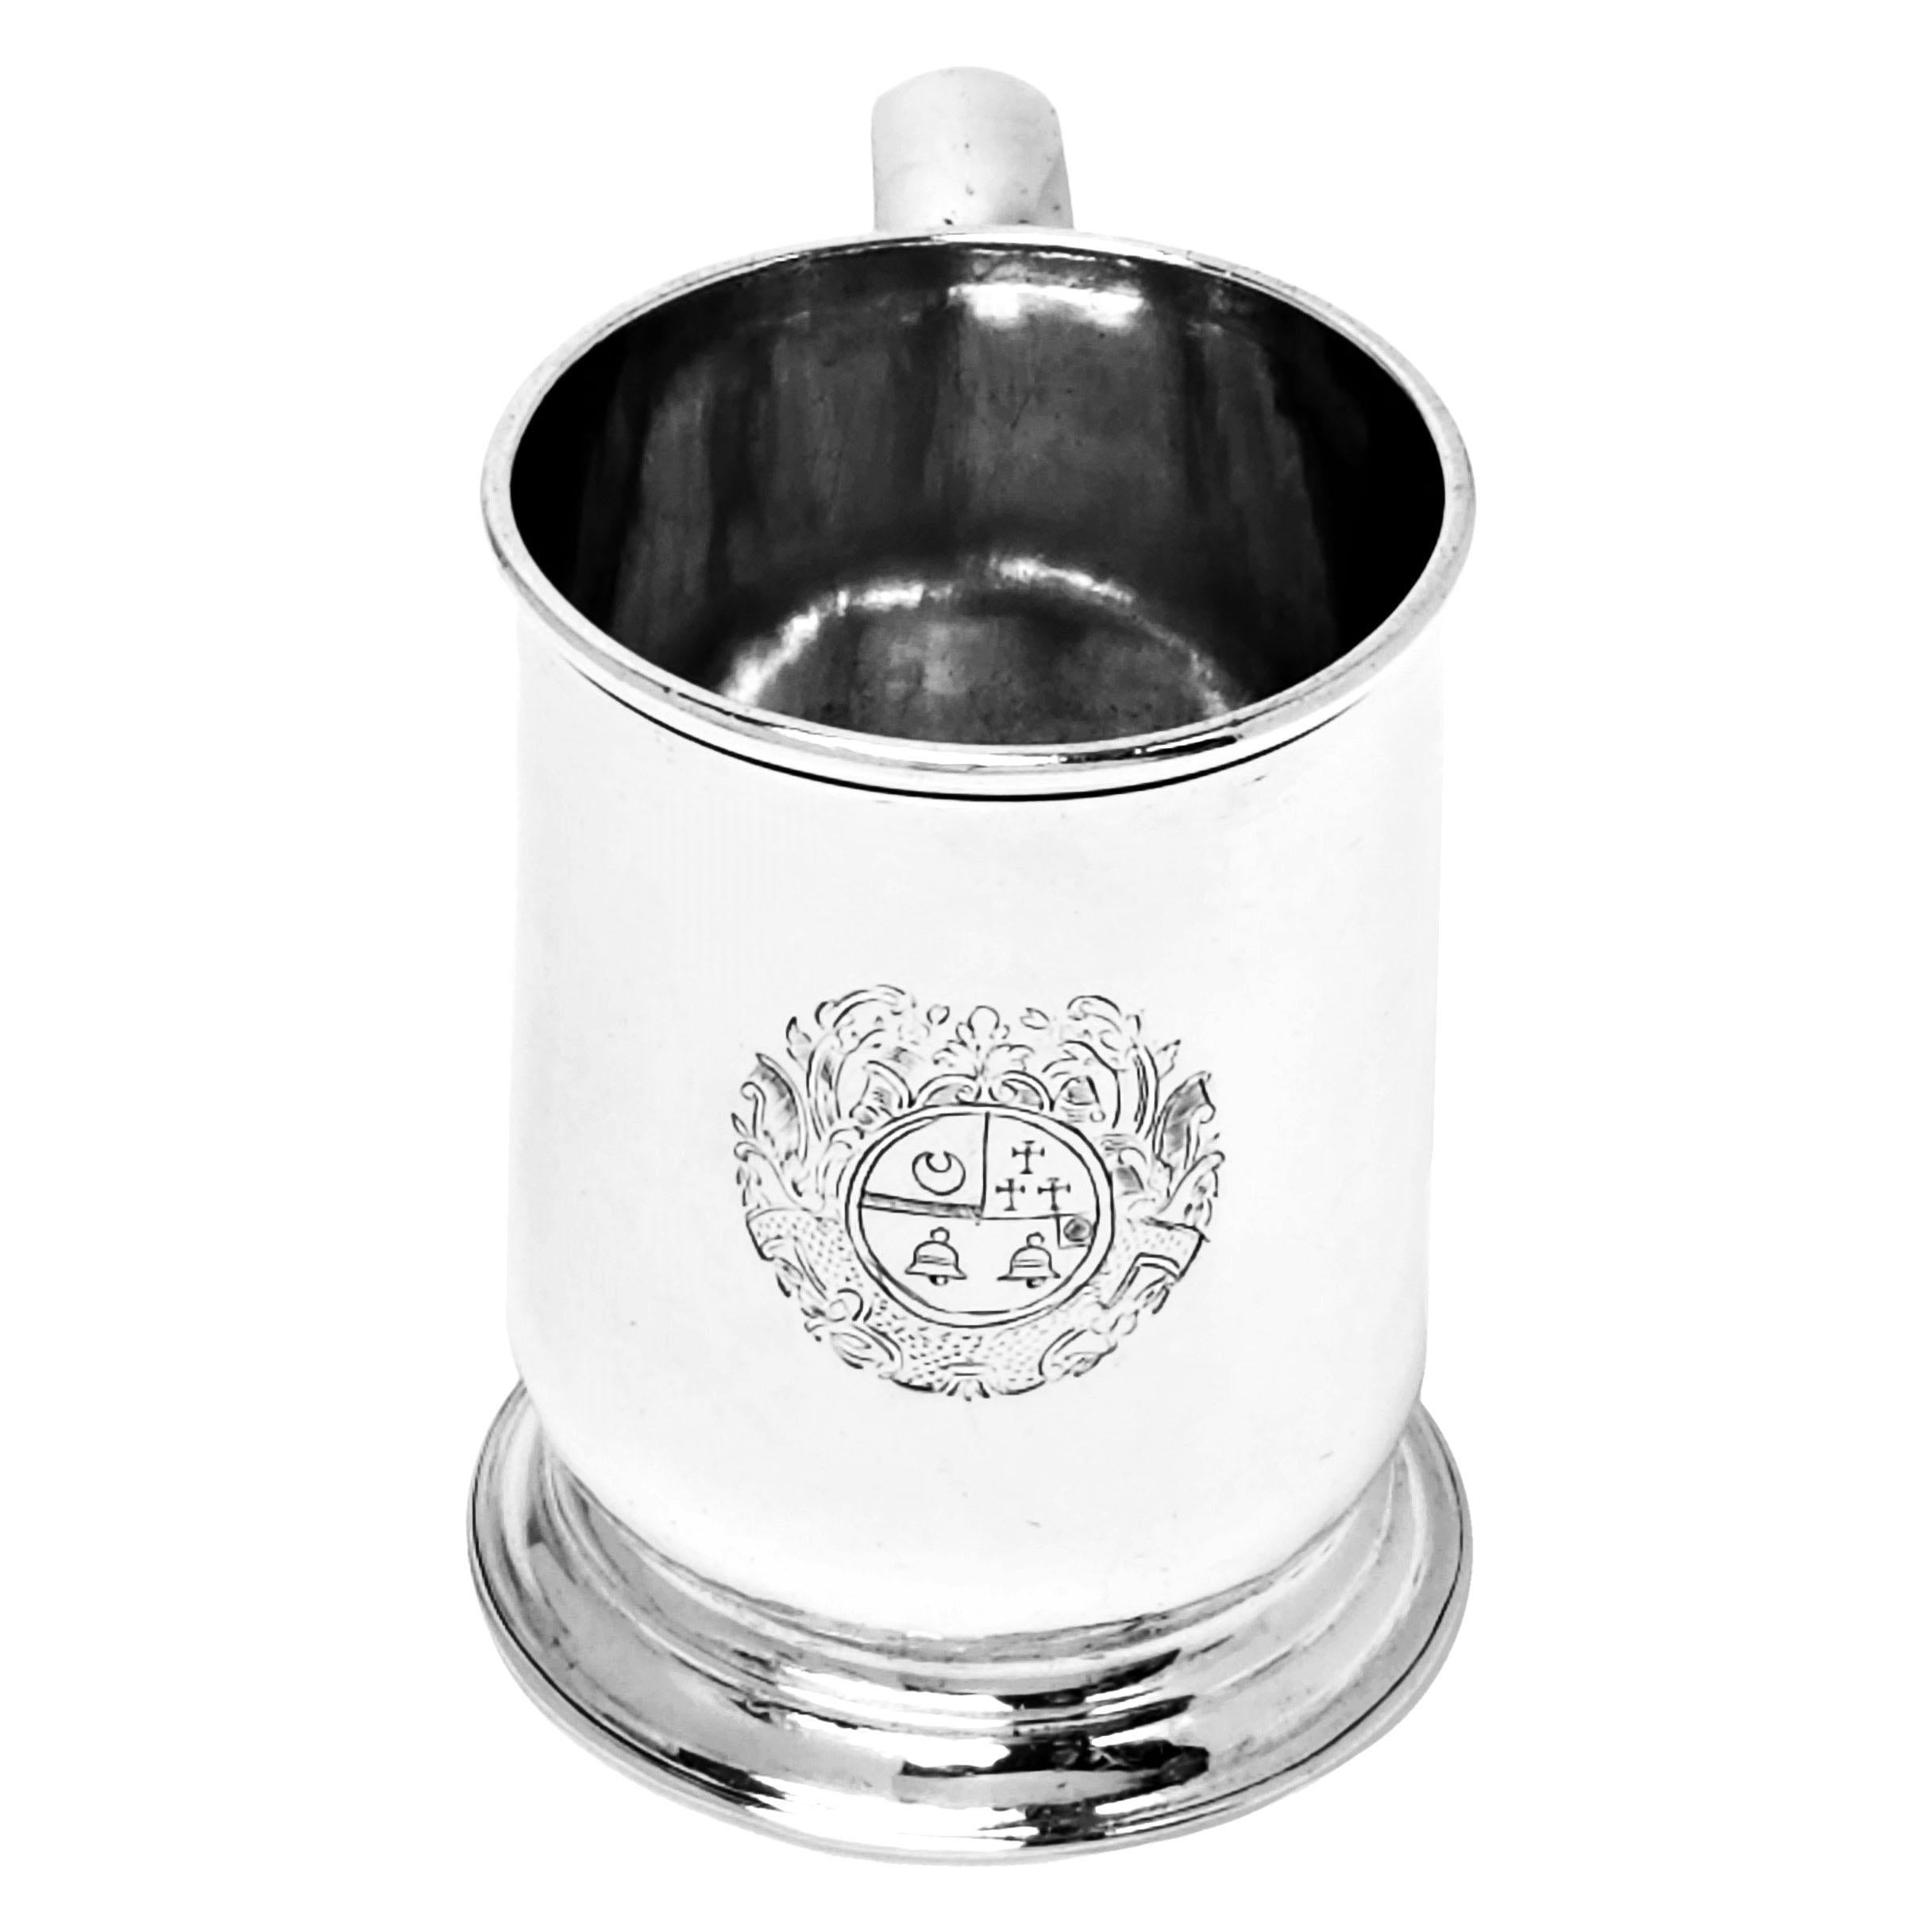 A classic antique George I sterling silver 1/2 Pint Mug with a round spread pedestal foot. The Beer Mug has an engraved crest on the side opposite the scroll handle.

Made in London, England in 1722 by John East.

Measures: Approx. Weight - 246g